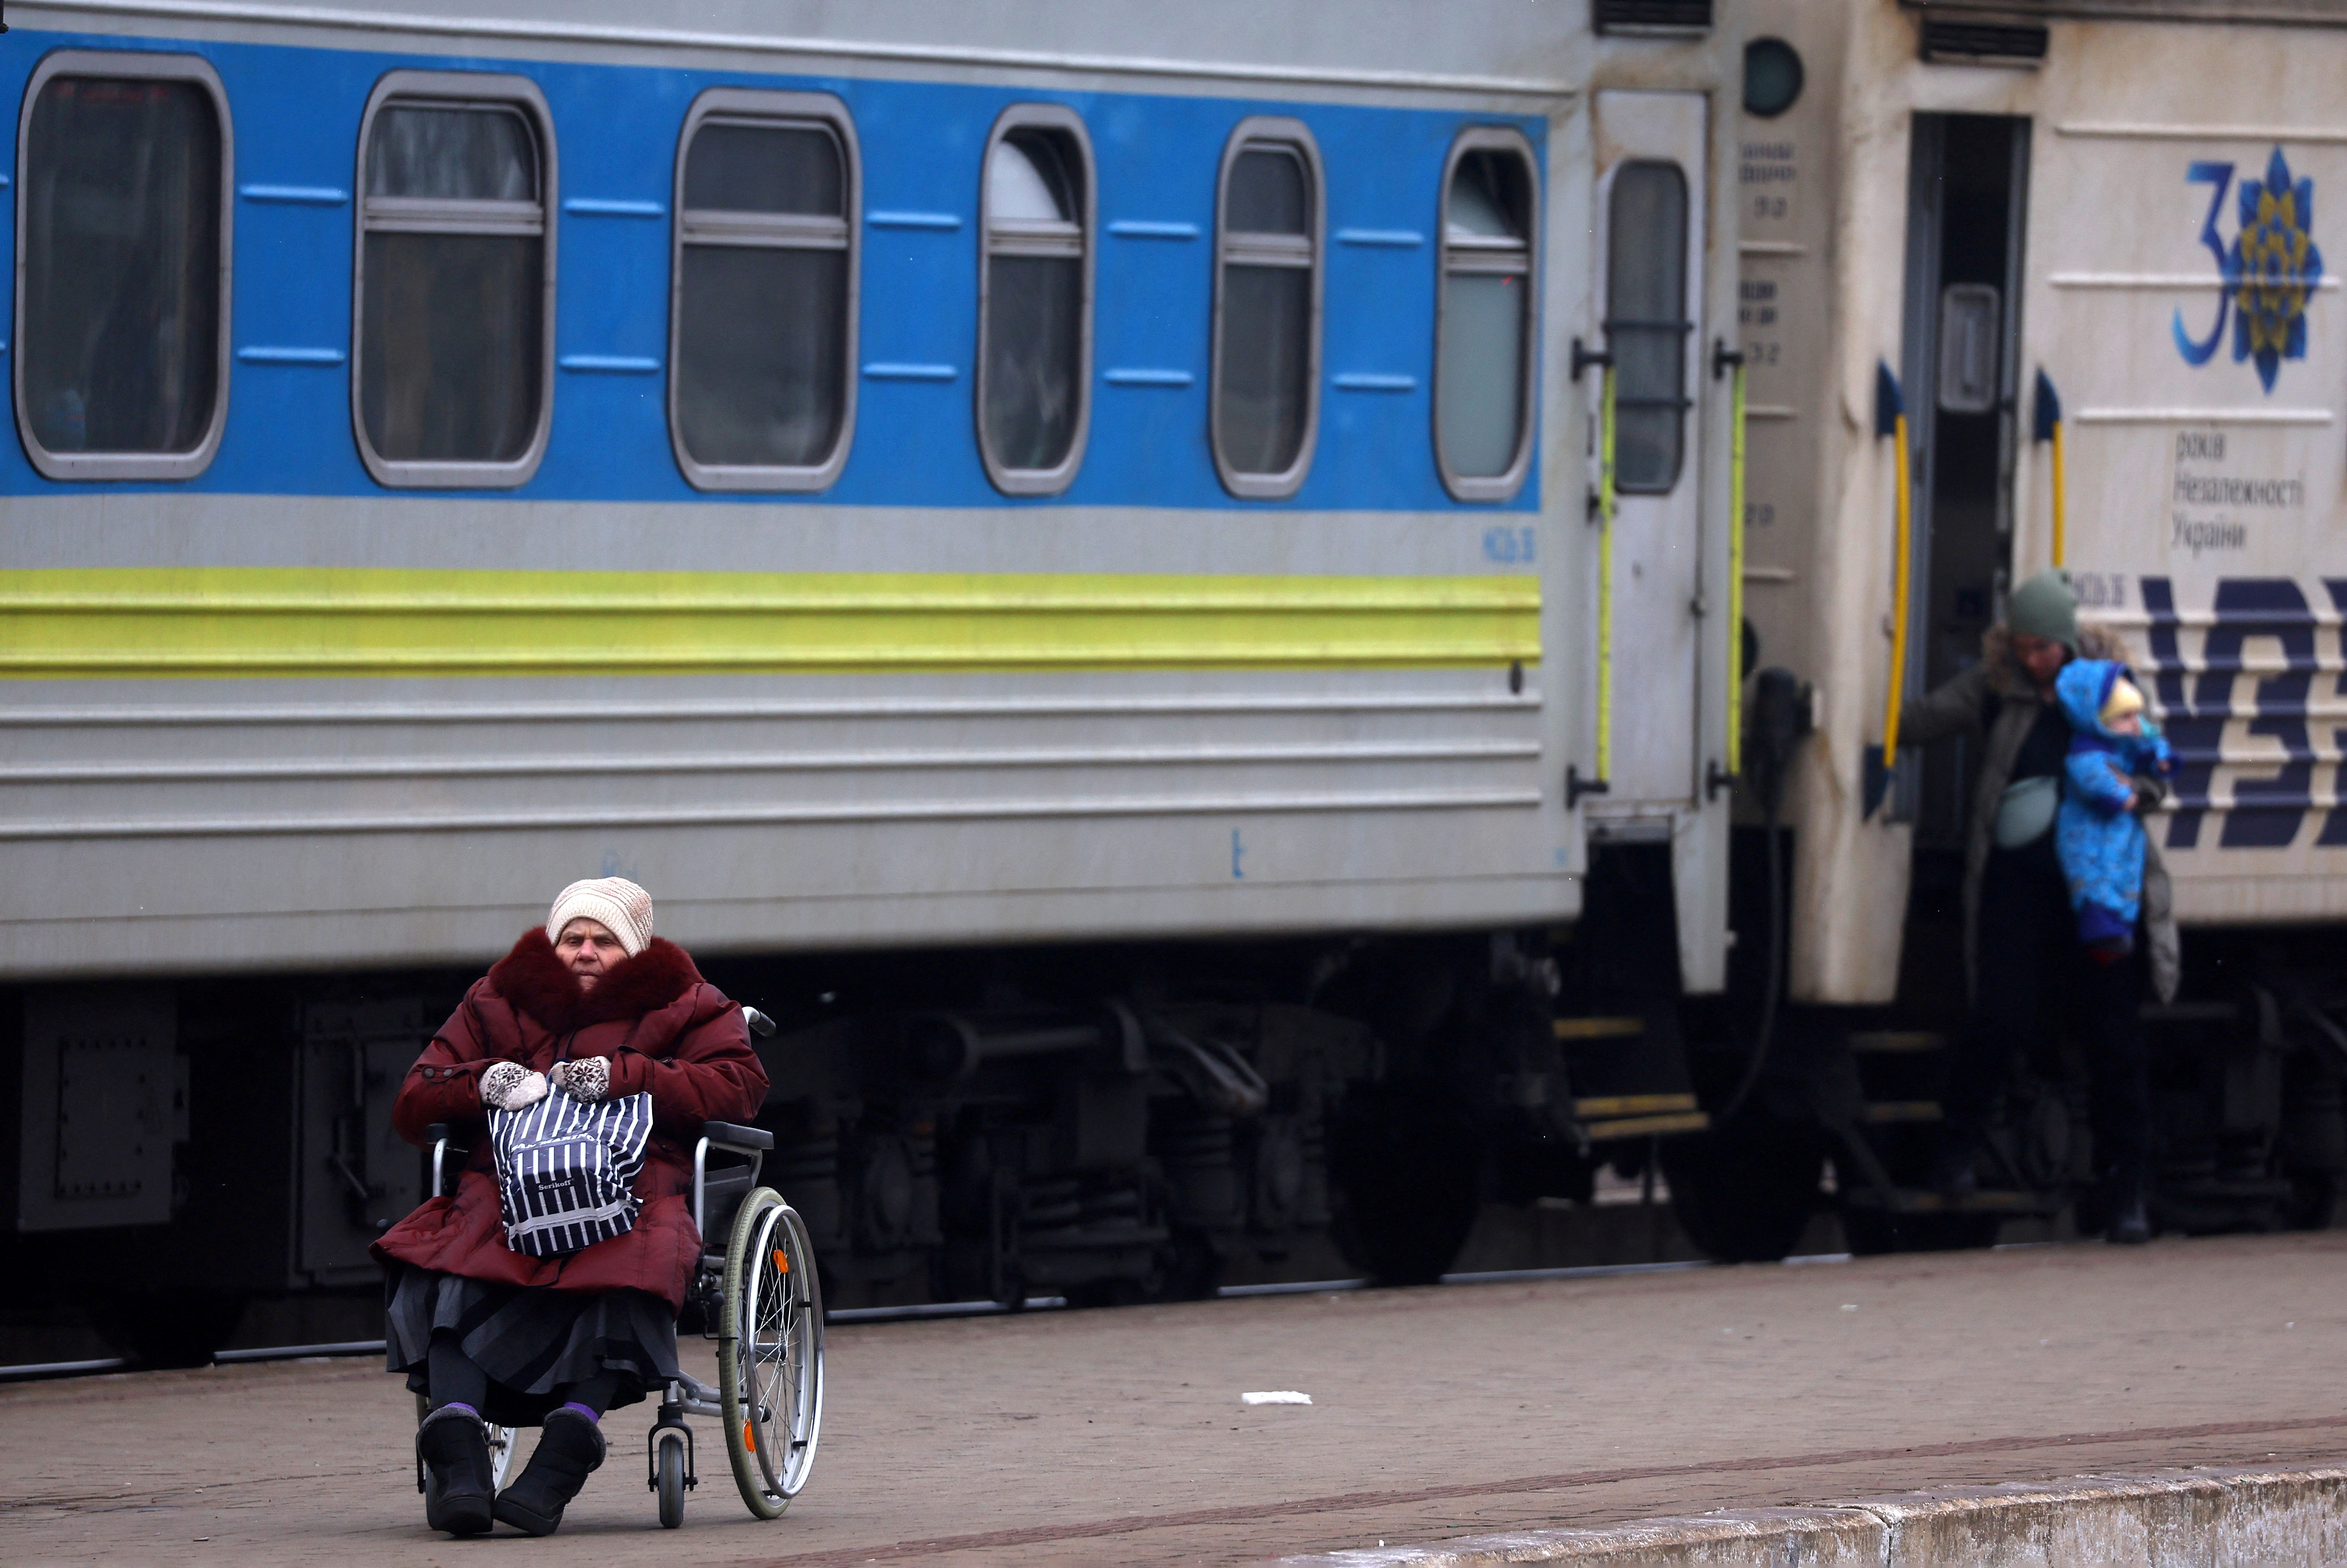 Refugees fleeing the Russian invasion wait for transit in Lviv